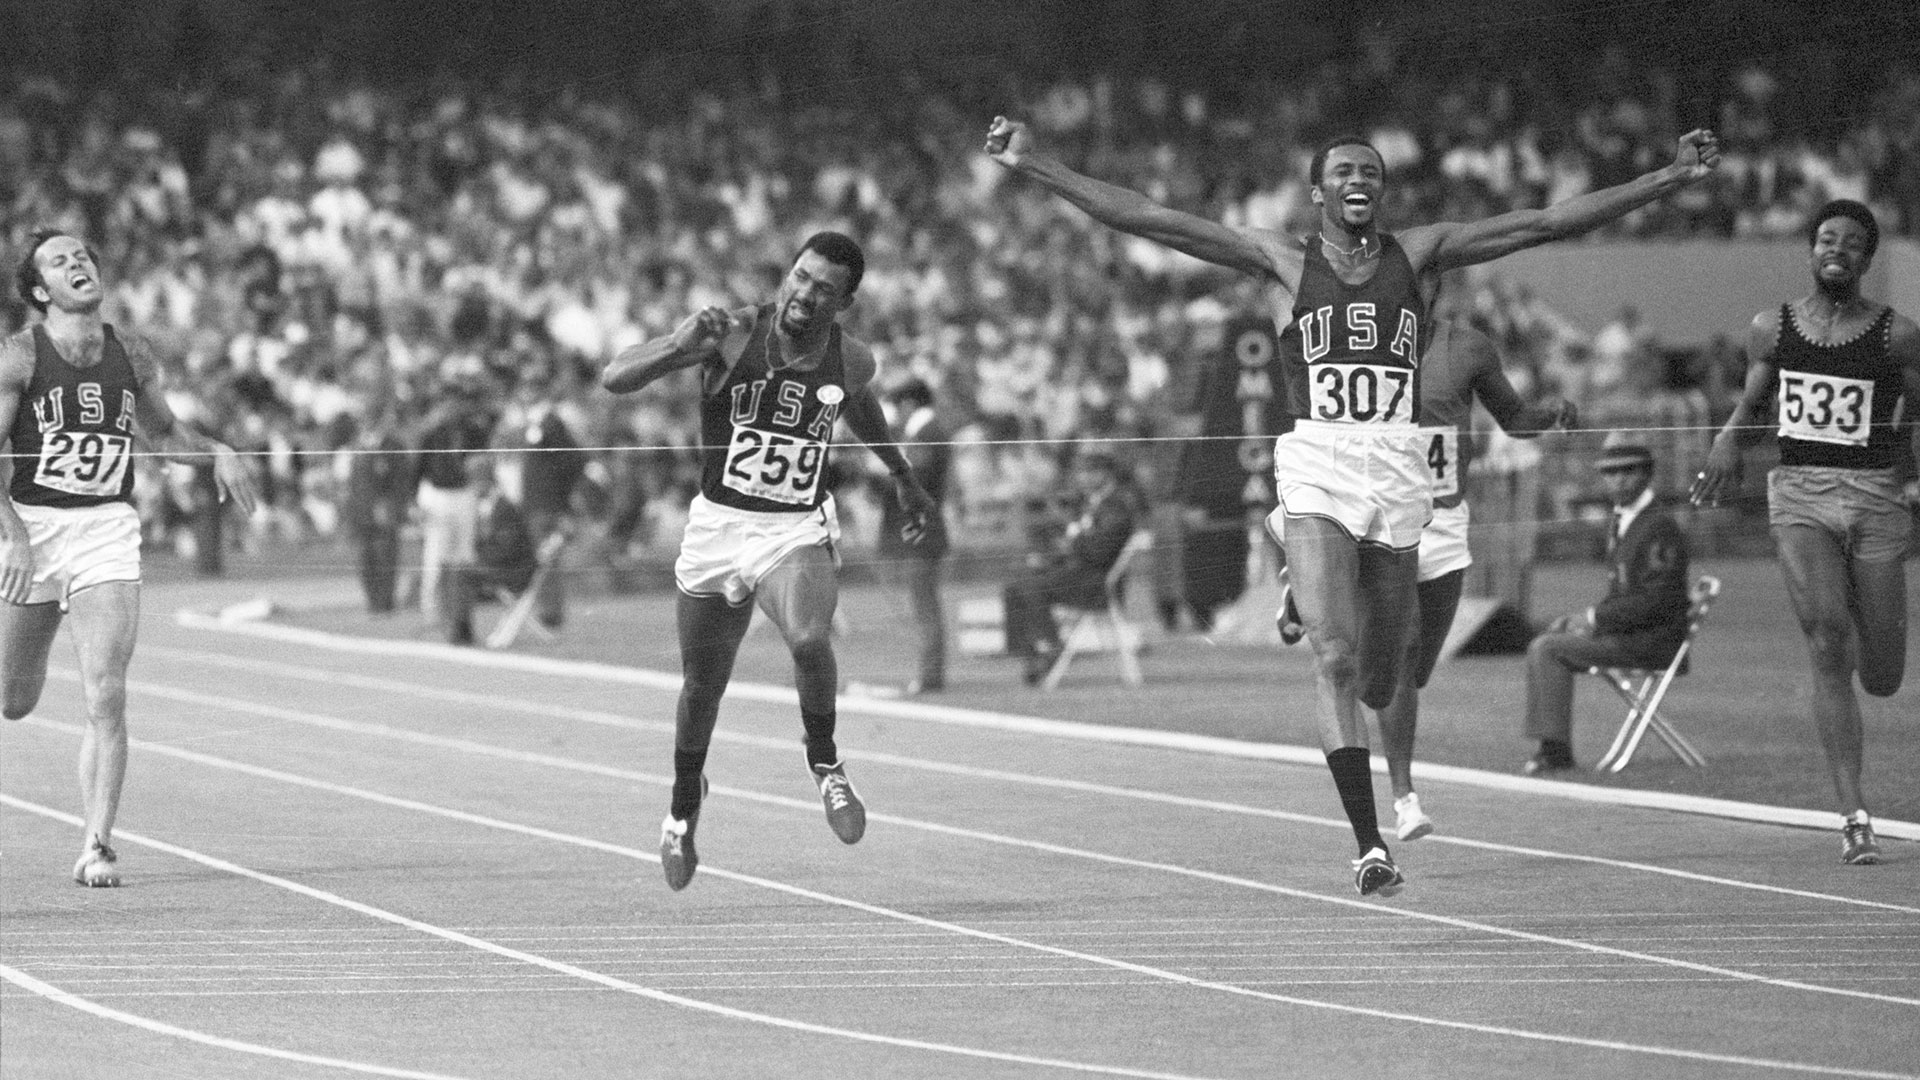 (Original Caption) 10/17/1968-Mexico City: Tommie Smith of Lemore, Calif., throws his arms up in victory as he hits the tape to win a gold medal in the men's 200-meter dash Oct. 16th with a time of 19.8 seconds--a new world record. Running despite an injured leg muscle, he steaked past teammate John Carlos of San Jose, Calif. (left), who placed third behind Peter Norman (behind Smith) of Australia.